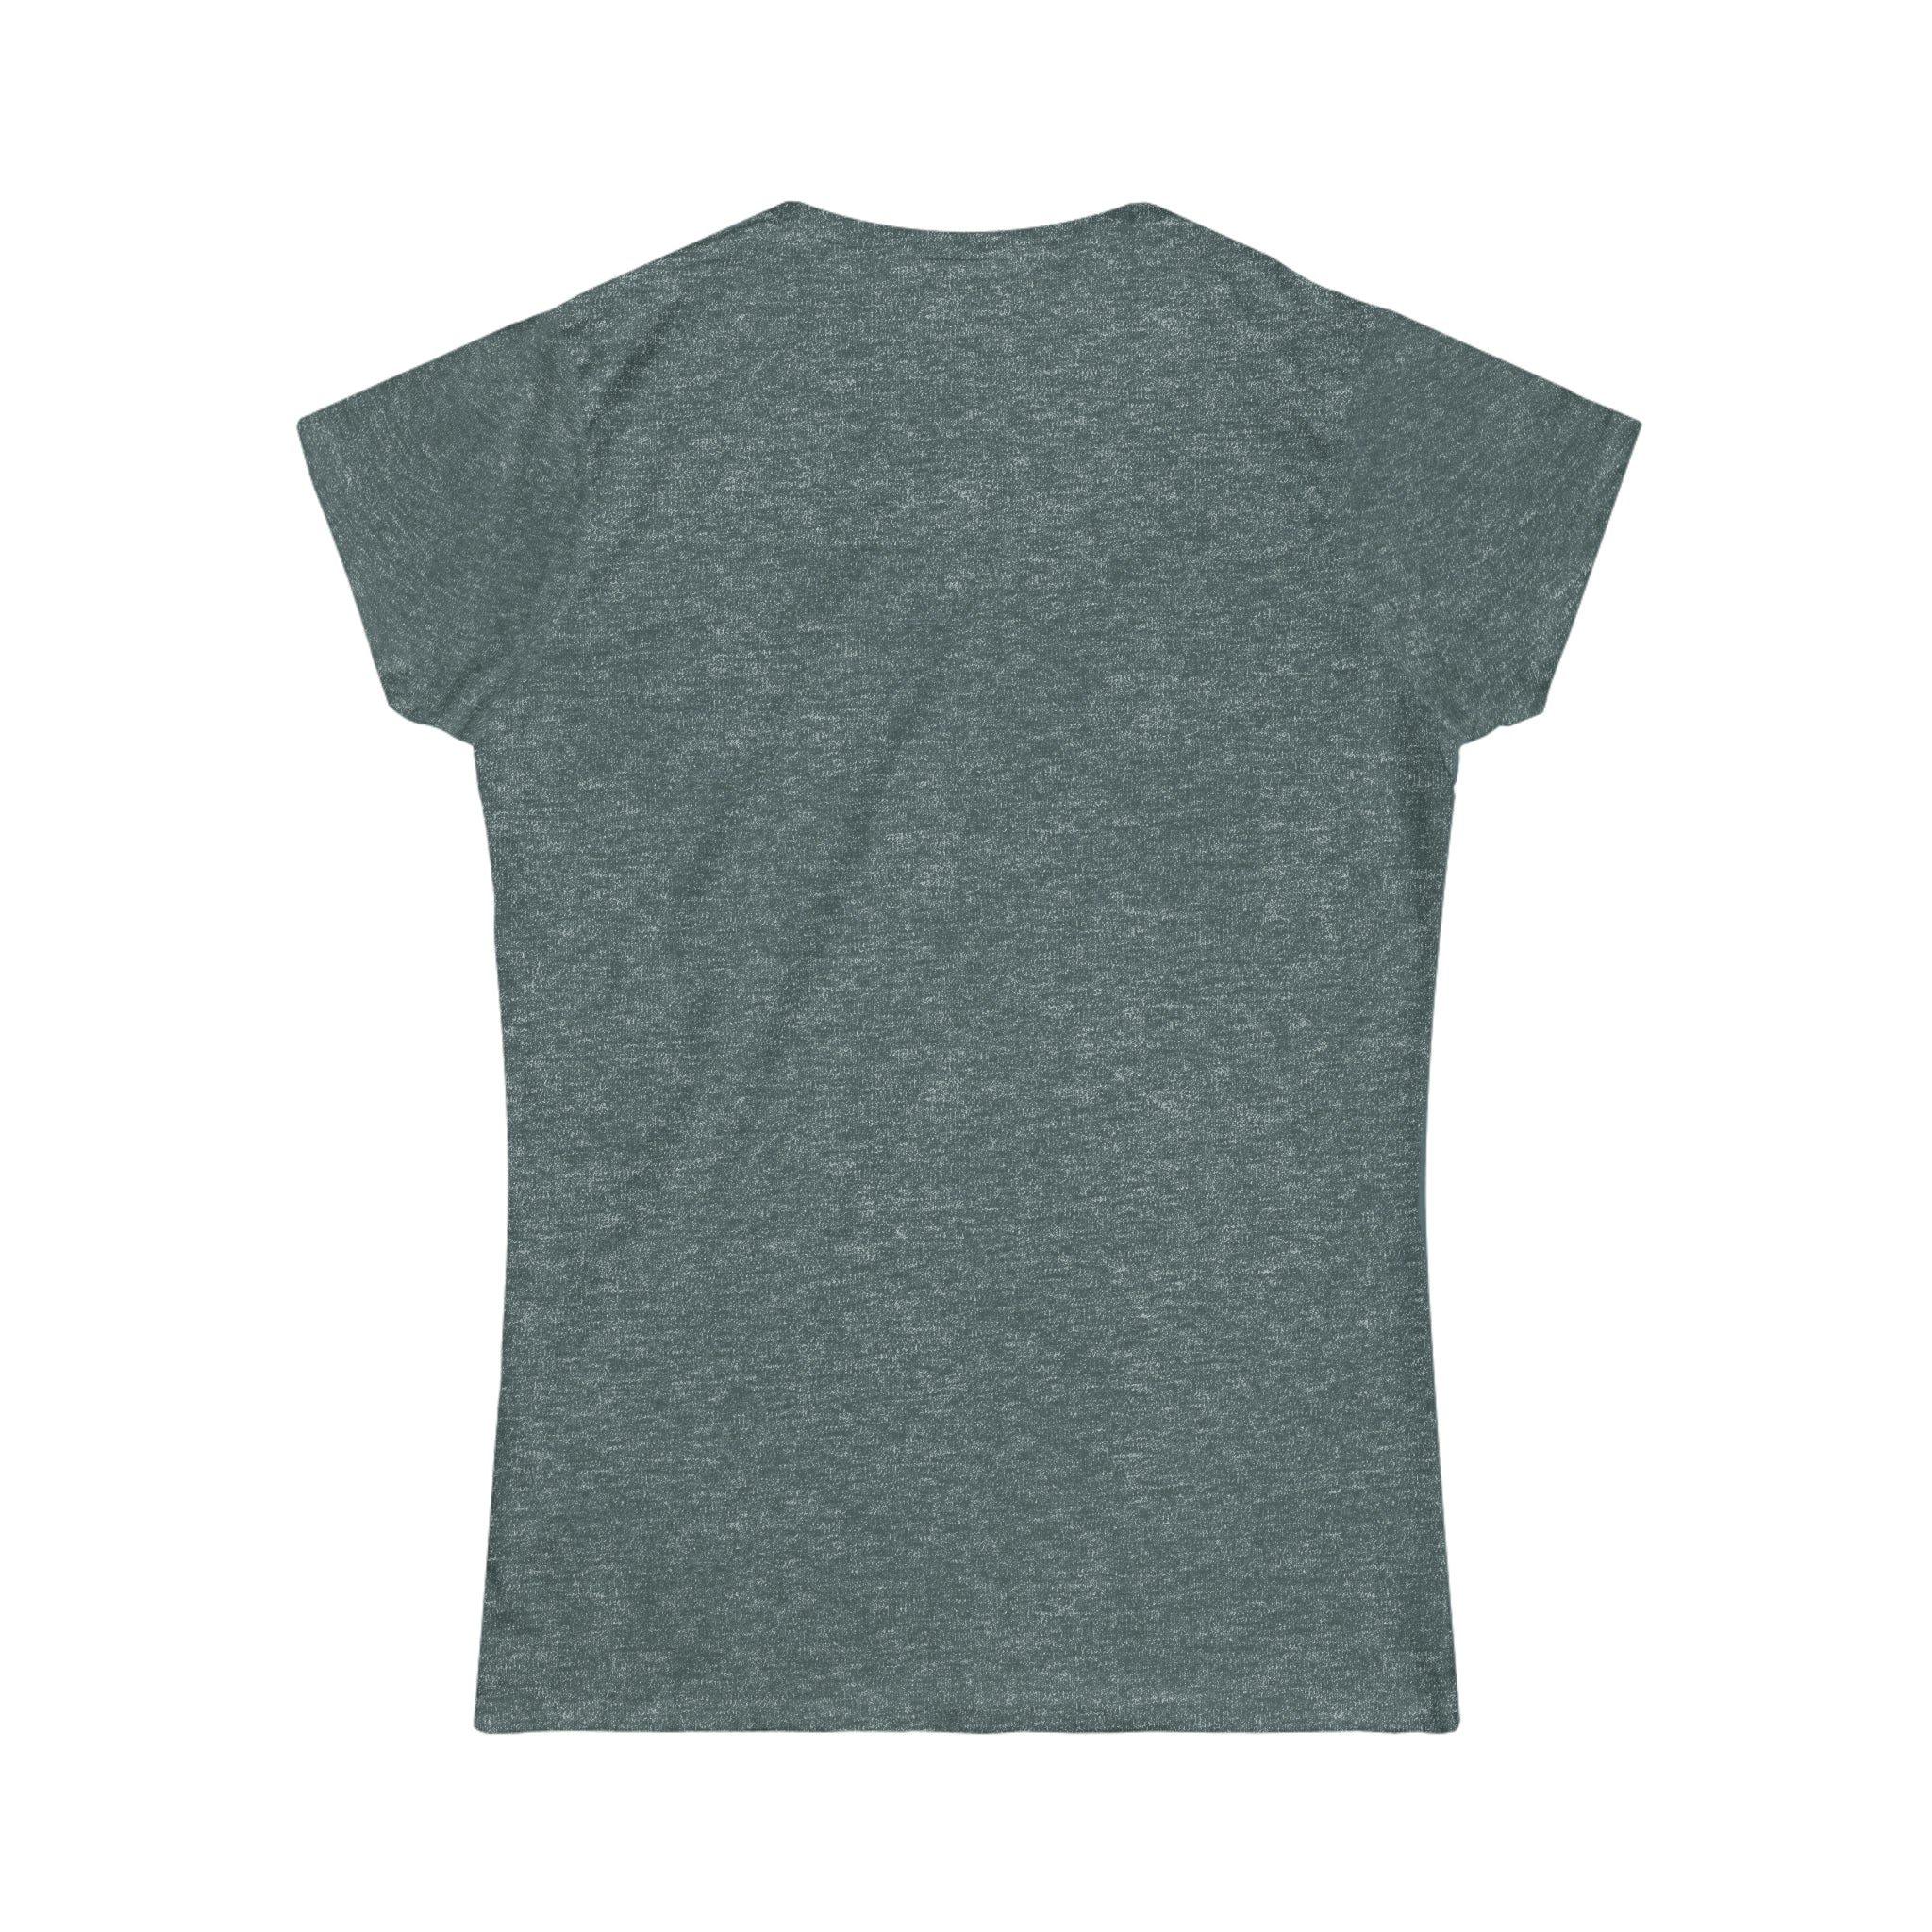 impossible! says who? women's midweight cotton tee